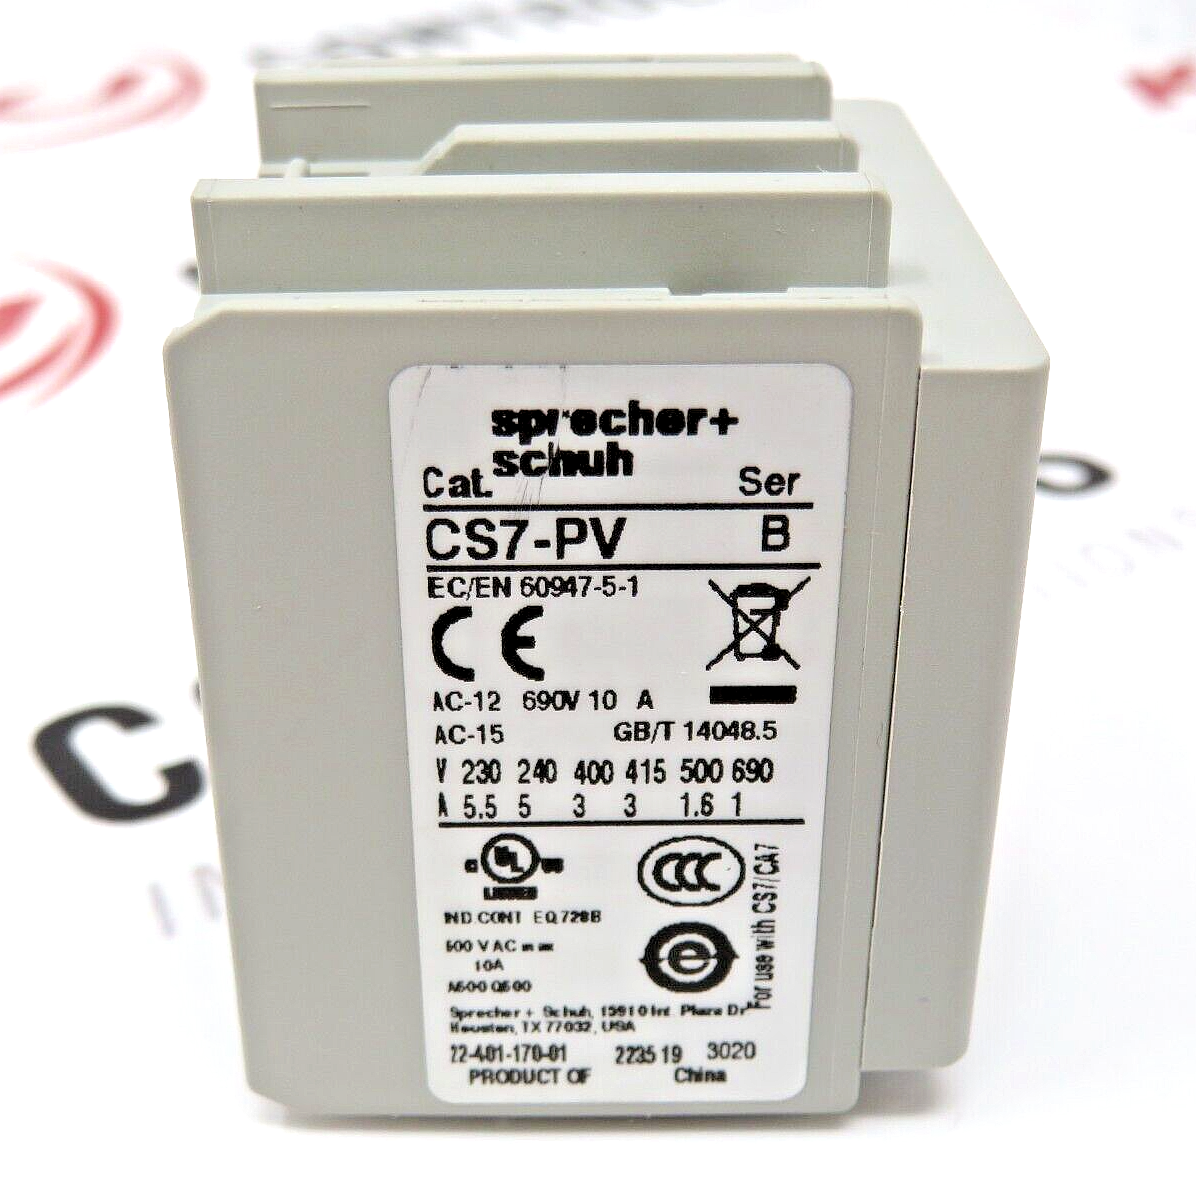 Sprecher + Schuh CS7-PV-22 Auxiliary Contact Front Mount 10 AMP 690 Volt